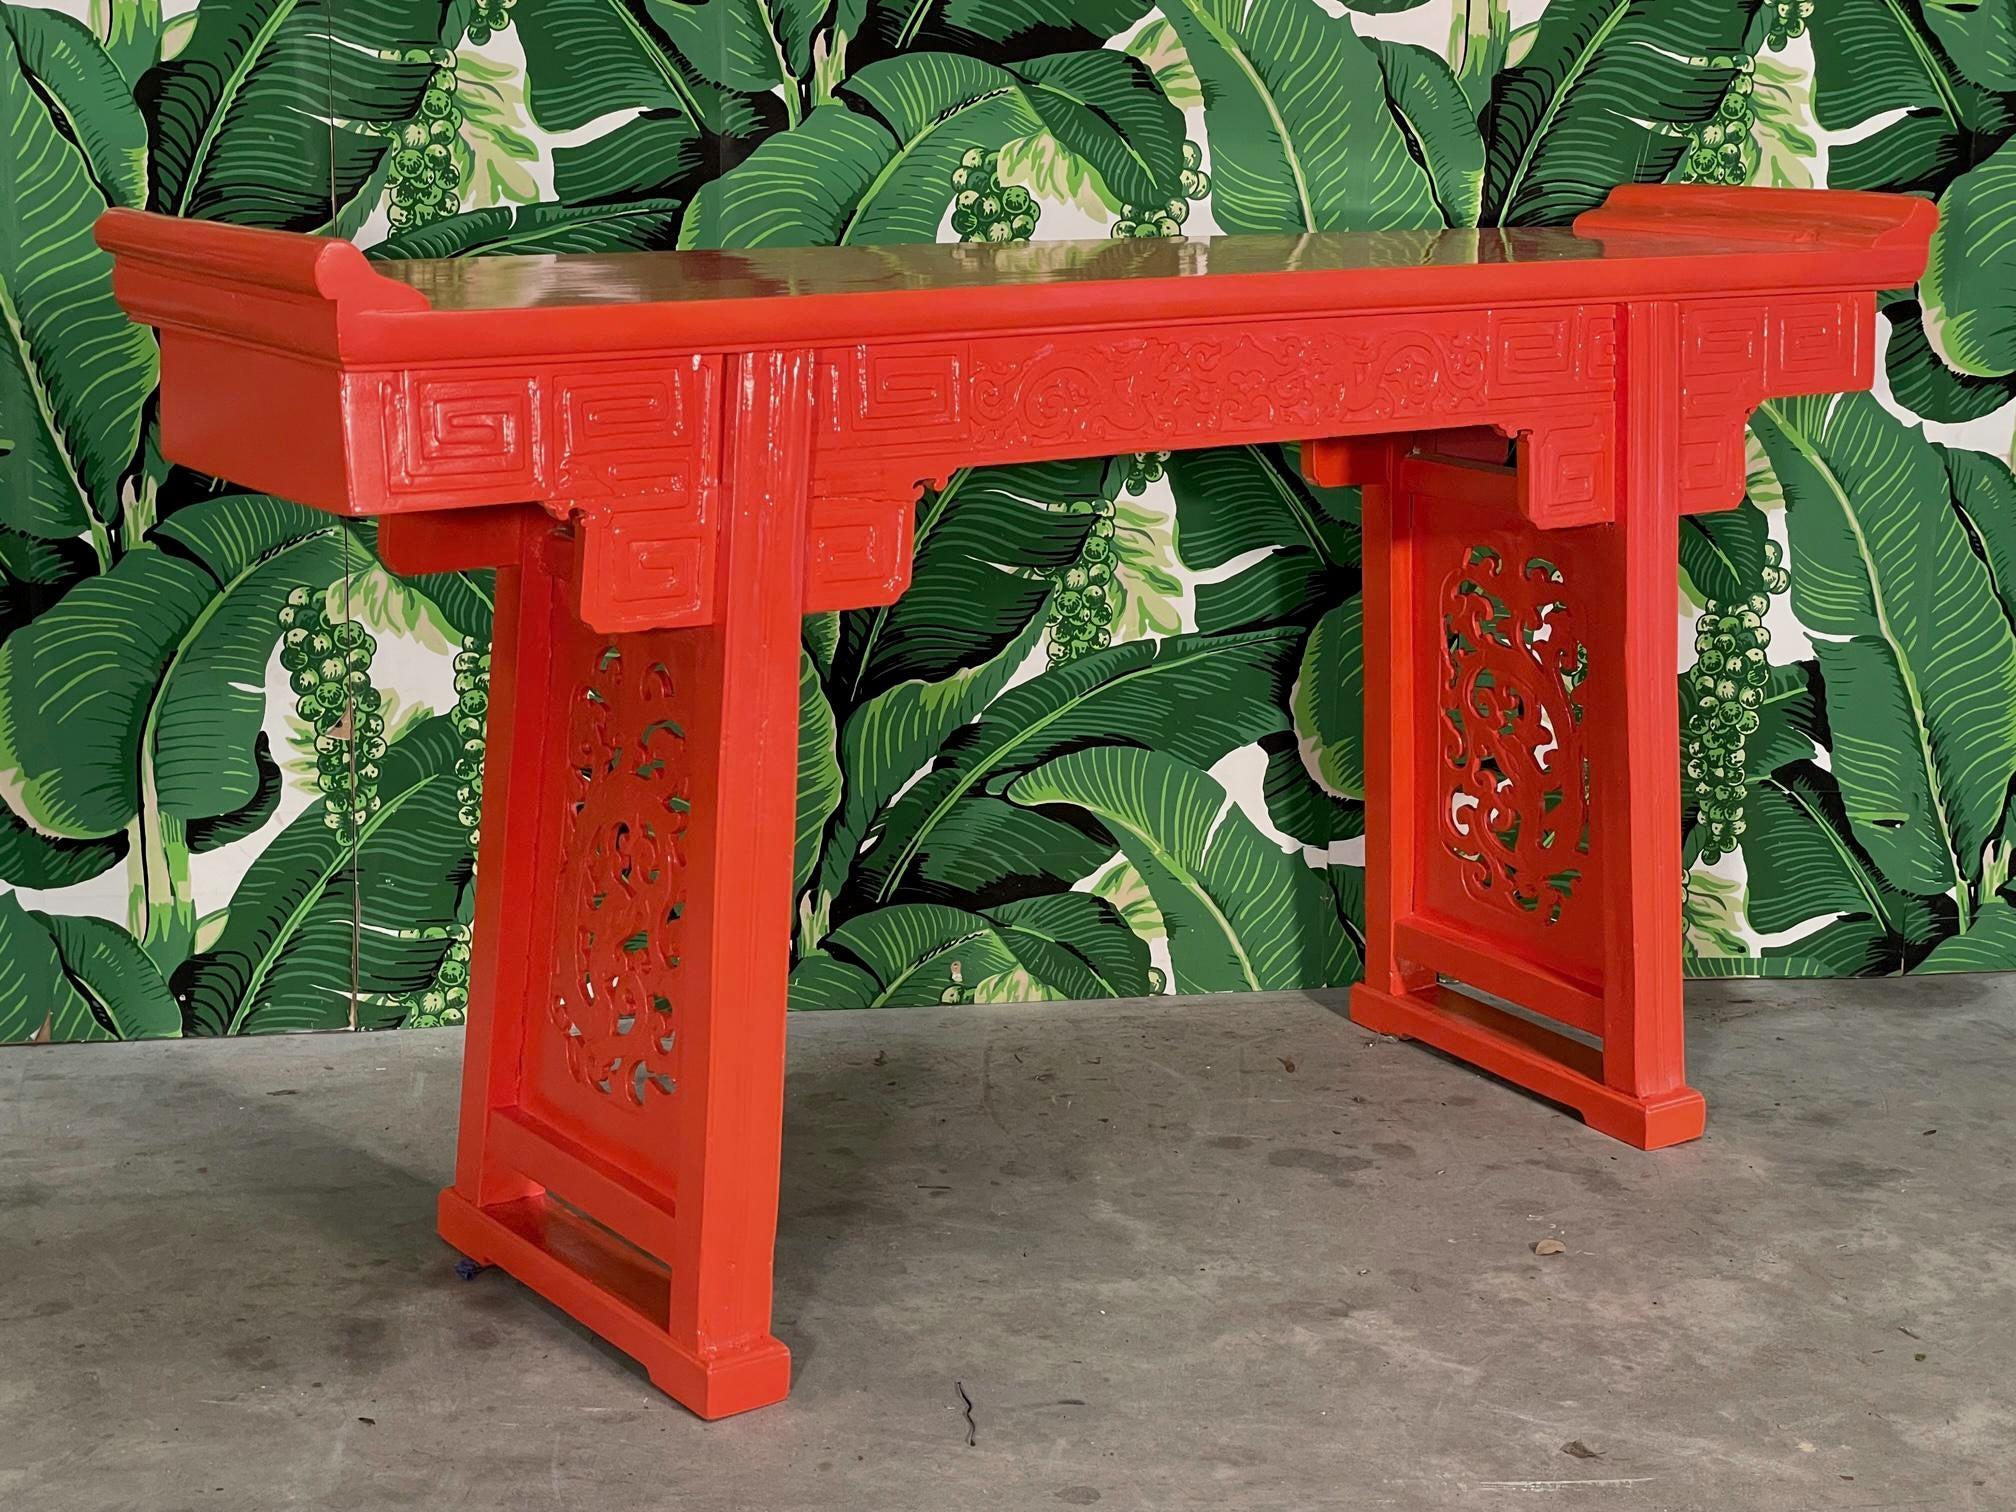 Asian carved altar or console table features hand carved images of dragons along the frieze and ornate snake images in the pierce carved leg struts. Newly high gloss lacquer in an Hermes orange. Stands 36